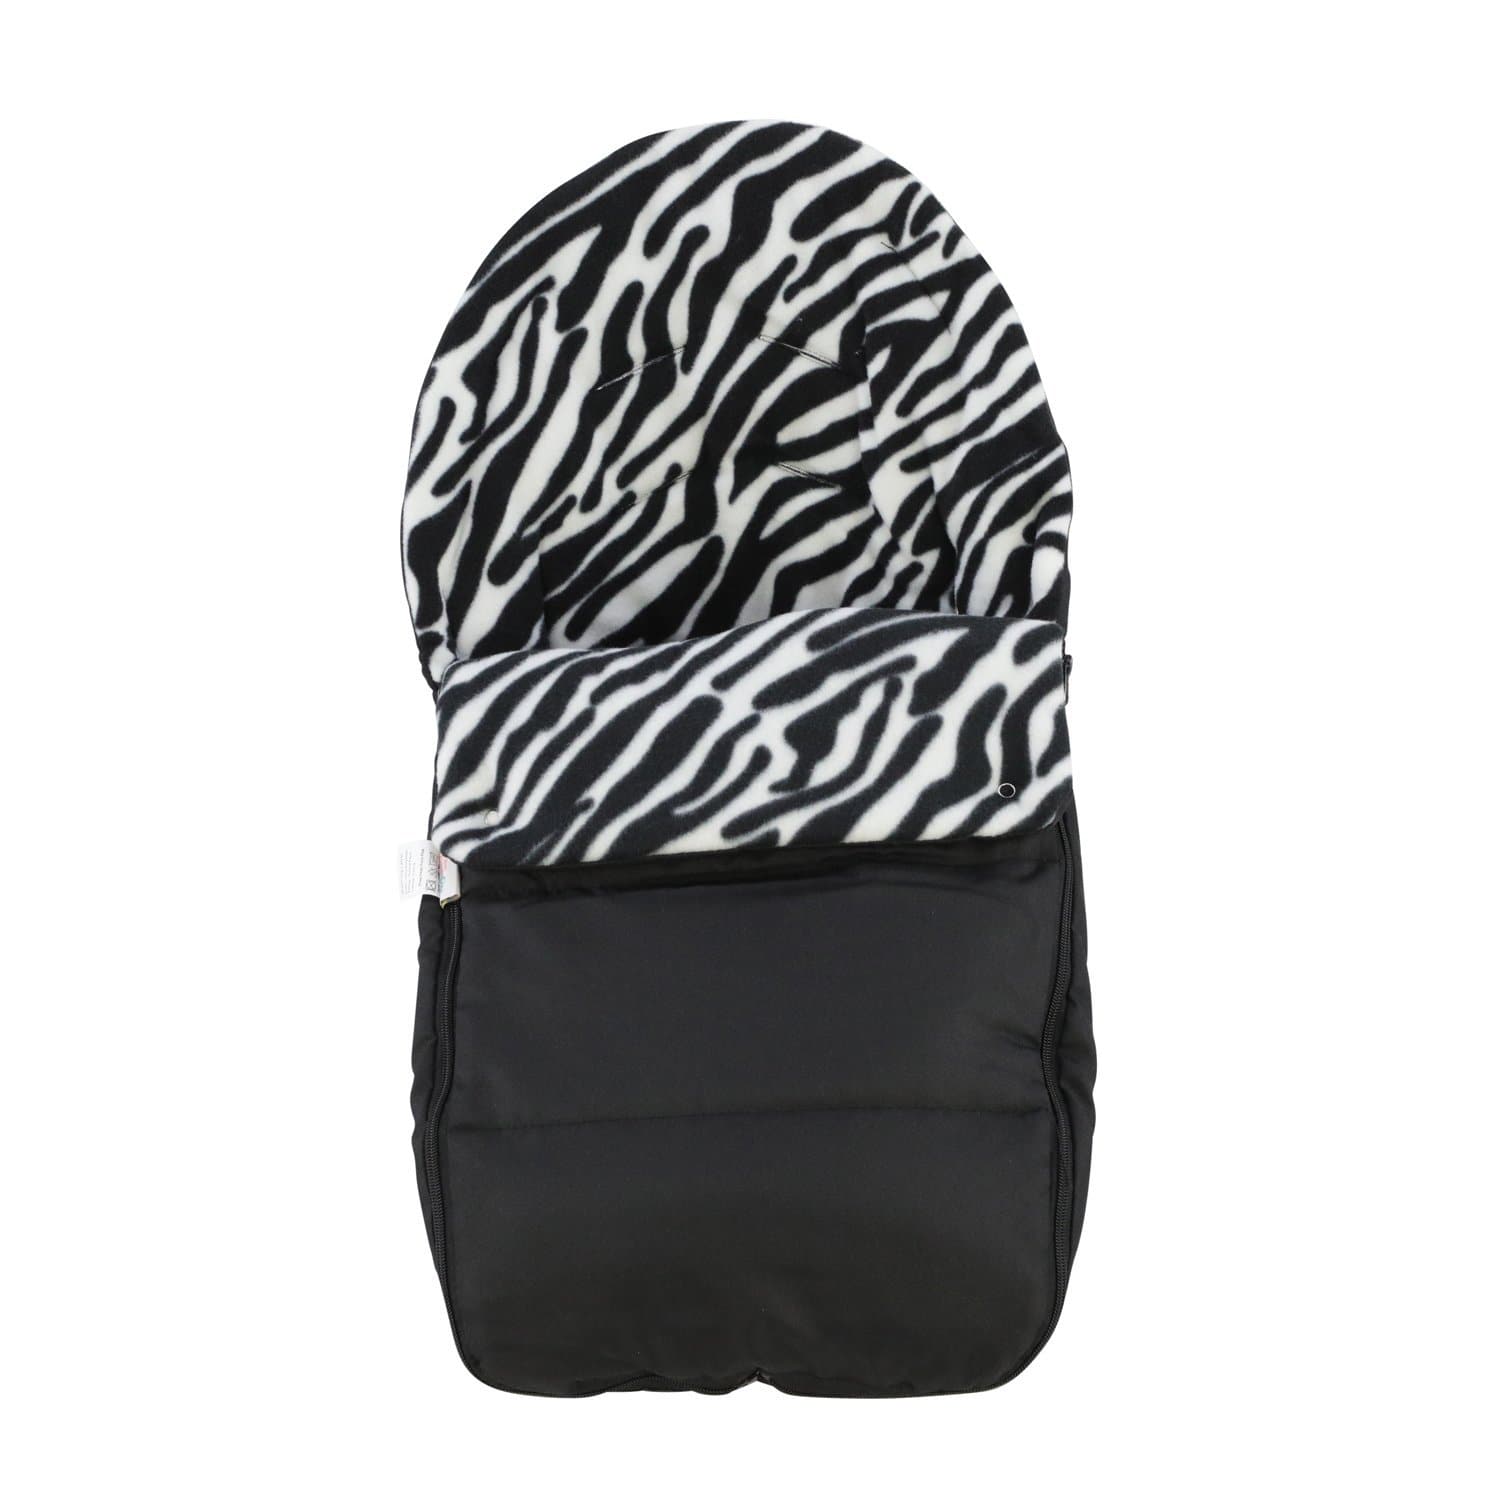 Animal Print Car Seat Footmuff / Cosy Toes Compatible with Jane - Fits All Models - For Your Little One